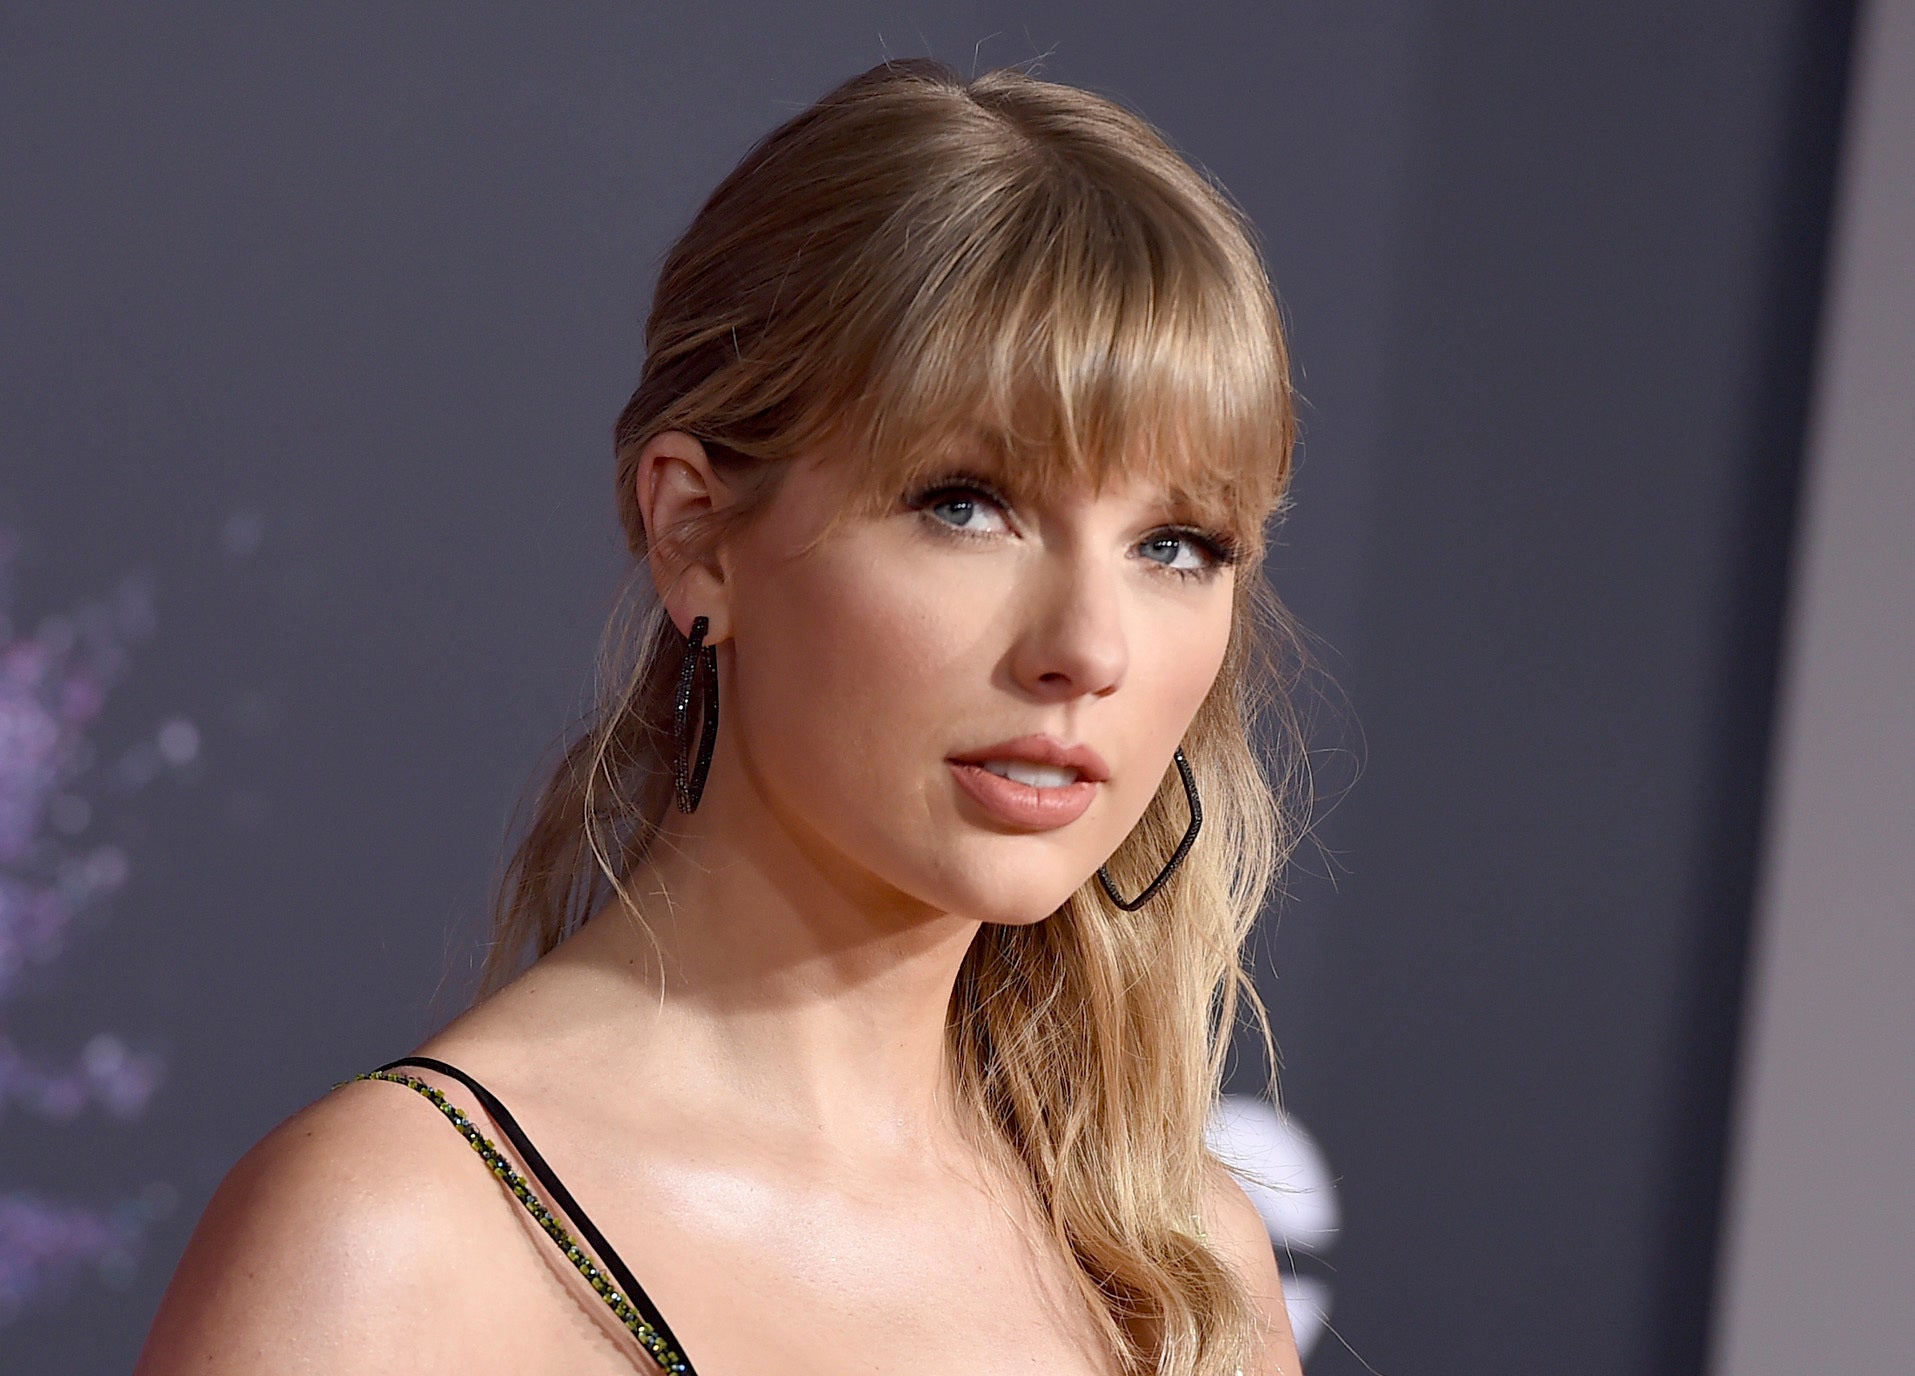 Taylor Swift is among the artists who have helped stir up contempt of major labels